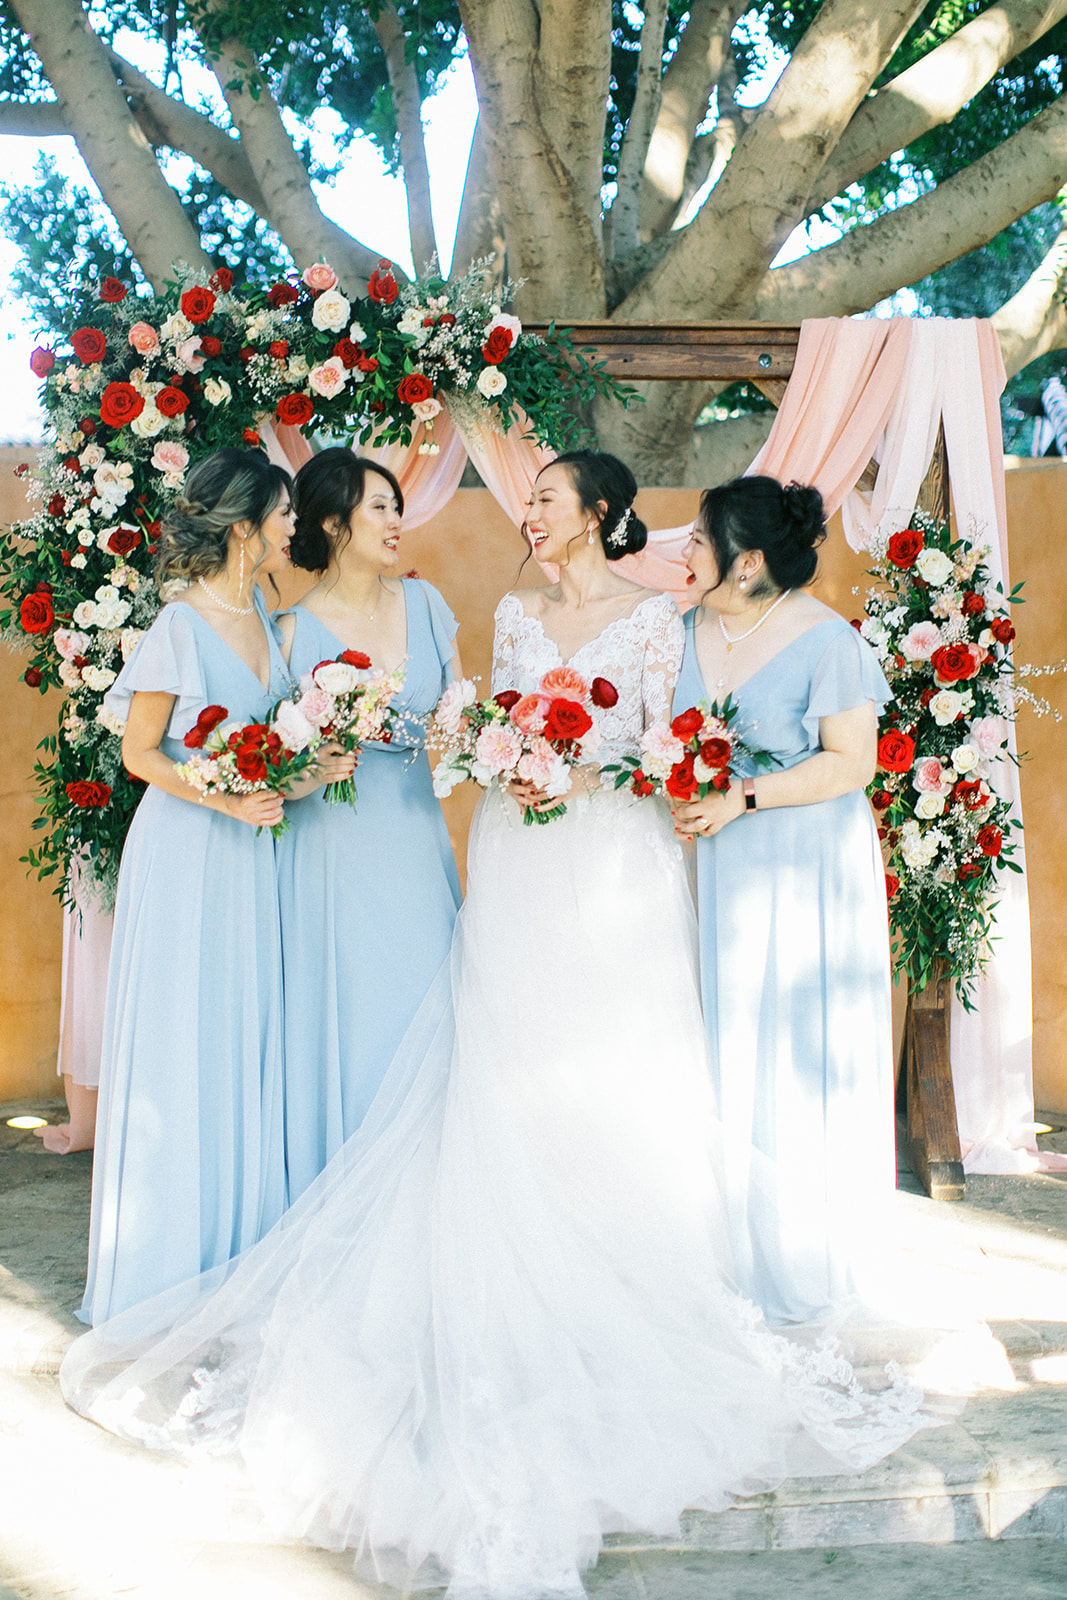 Bridesmaids in light blue dresses with bride in front of ceremony altar, all holding bouquets.